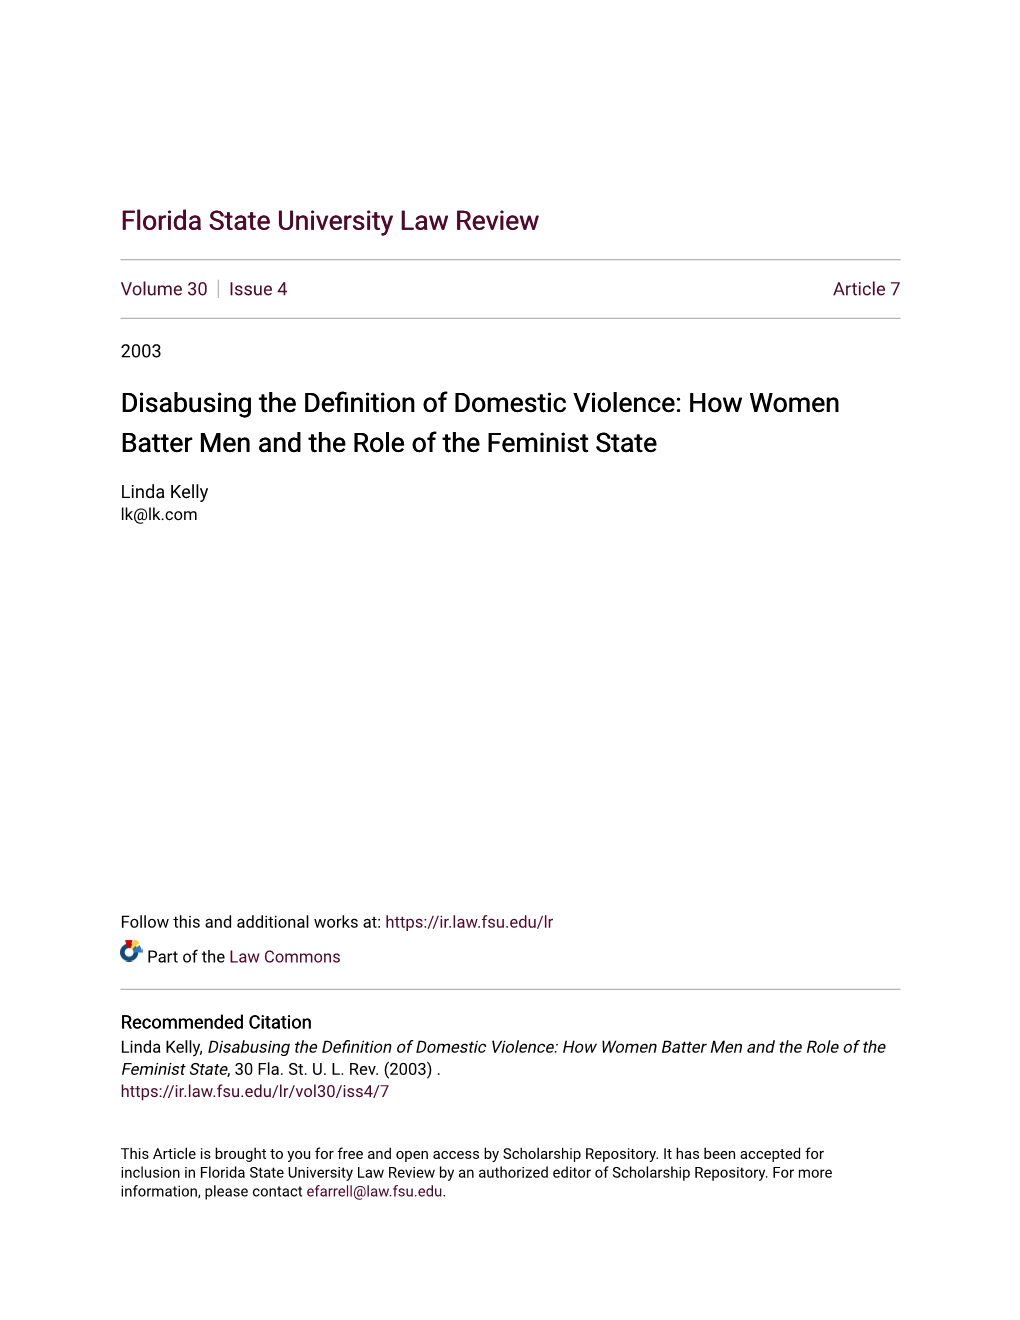 Disabusing the Definition of Domestic Violence: How Women Batter Men and the Role of the Feminist State